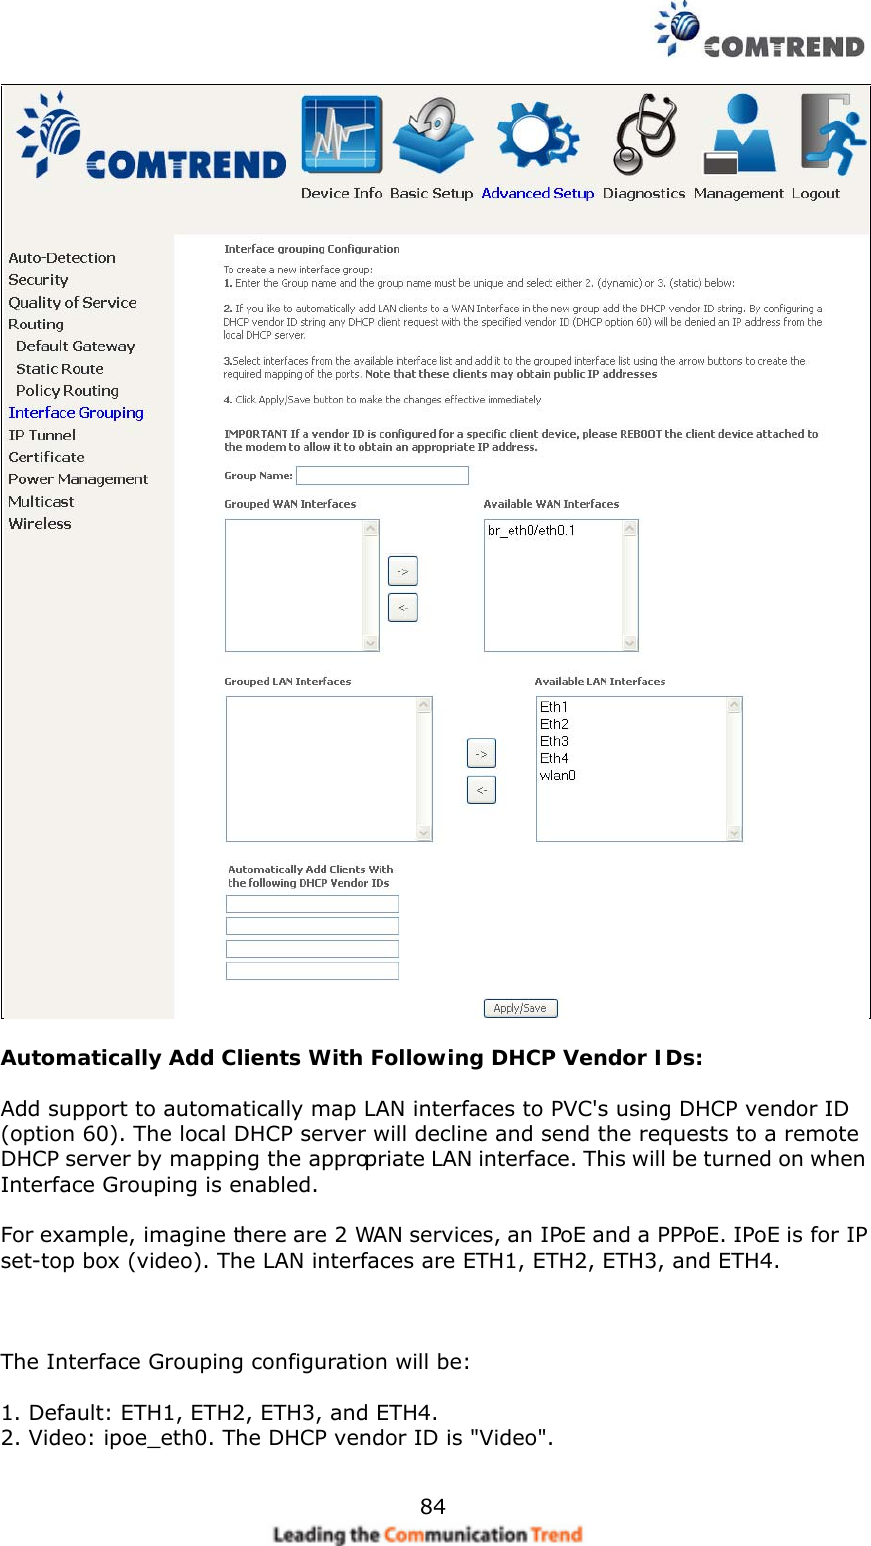    84   Automatically Add Clients With Following DHCP Vendor IDs:  Add support to automatically map LAN interfaces to PVC&apos;s using DHCP vendor ID (option 60). The local DHCP server will decline and send the requests to a remote DHCP server by mapping the appropriate LAN interface. This will be turned on when Interface Grouping is enabled.  For example, imagine there are 2 WAN services, an IPoE and a PPPoE. IPoE is for IP set-top box (video). The LAN interfaces are ETH1, ETH2, ETH3, and ETH4.    The Interface Grouping configuration will be:  1. Default: ETH1, ETH2, ETH3, and ETH4. 2. Video: ipoe_eth0. The DHCP vendor ID is &quot;Video&quot;.  